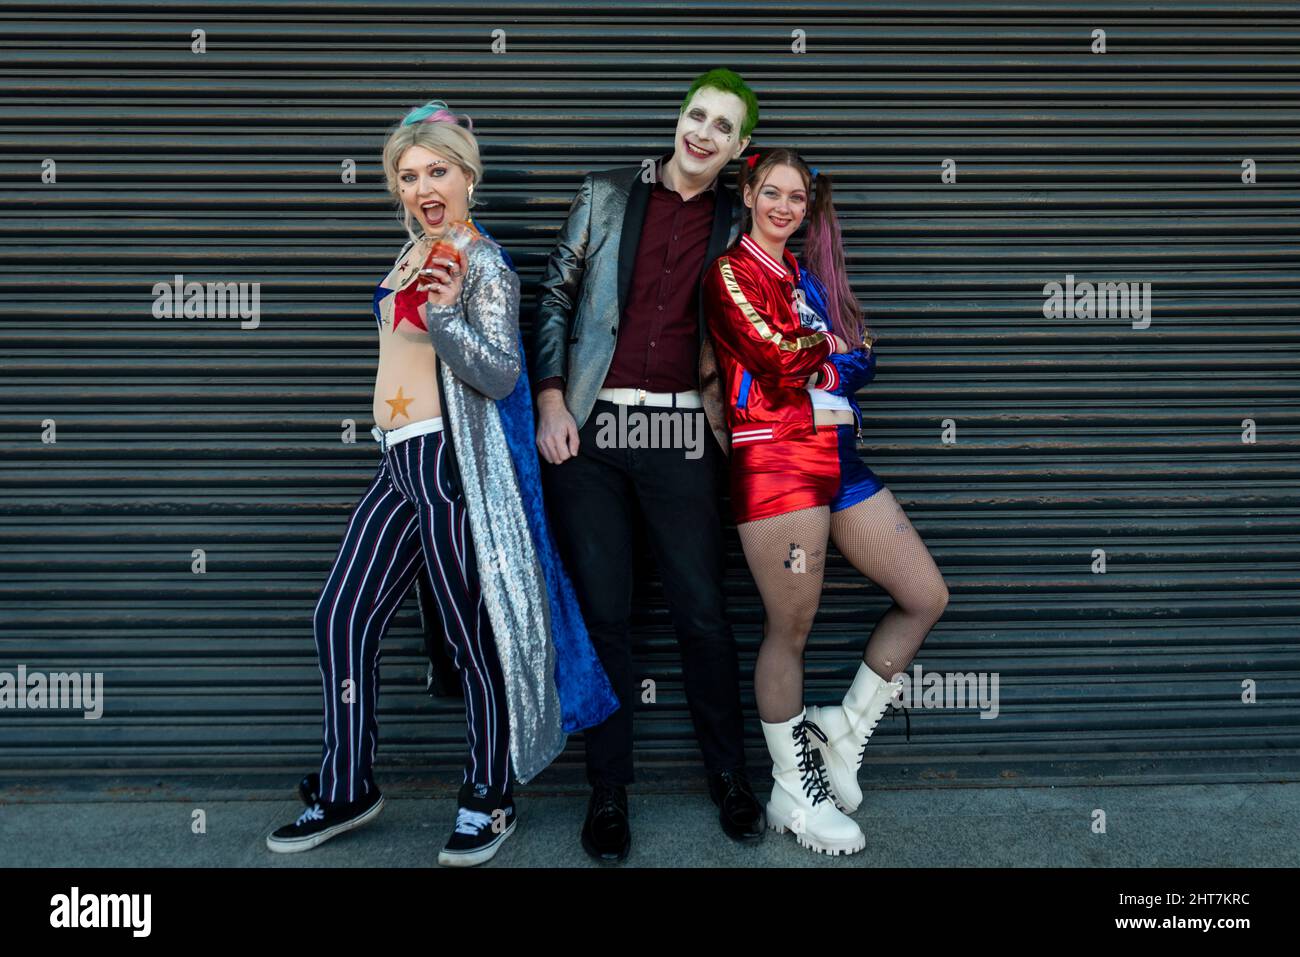 London, UK.  27 February 2022.  People dressed as Harley Quinn and The Joker, DC comics characters, arrive at London Comic Con Spring held in Kensington Olympia.  The festival celebrates comics, film and TV.  Credit: Stephen Chung / Alamy Live News Stock Photo